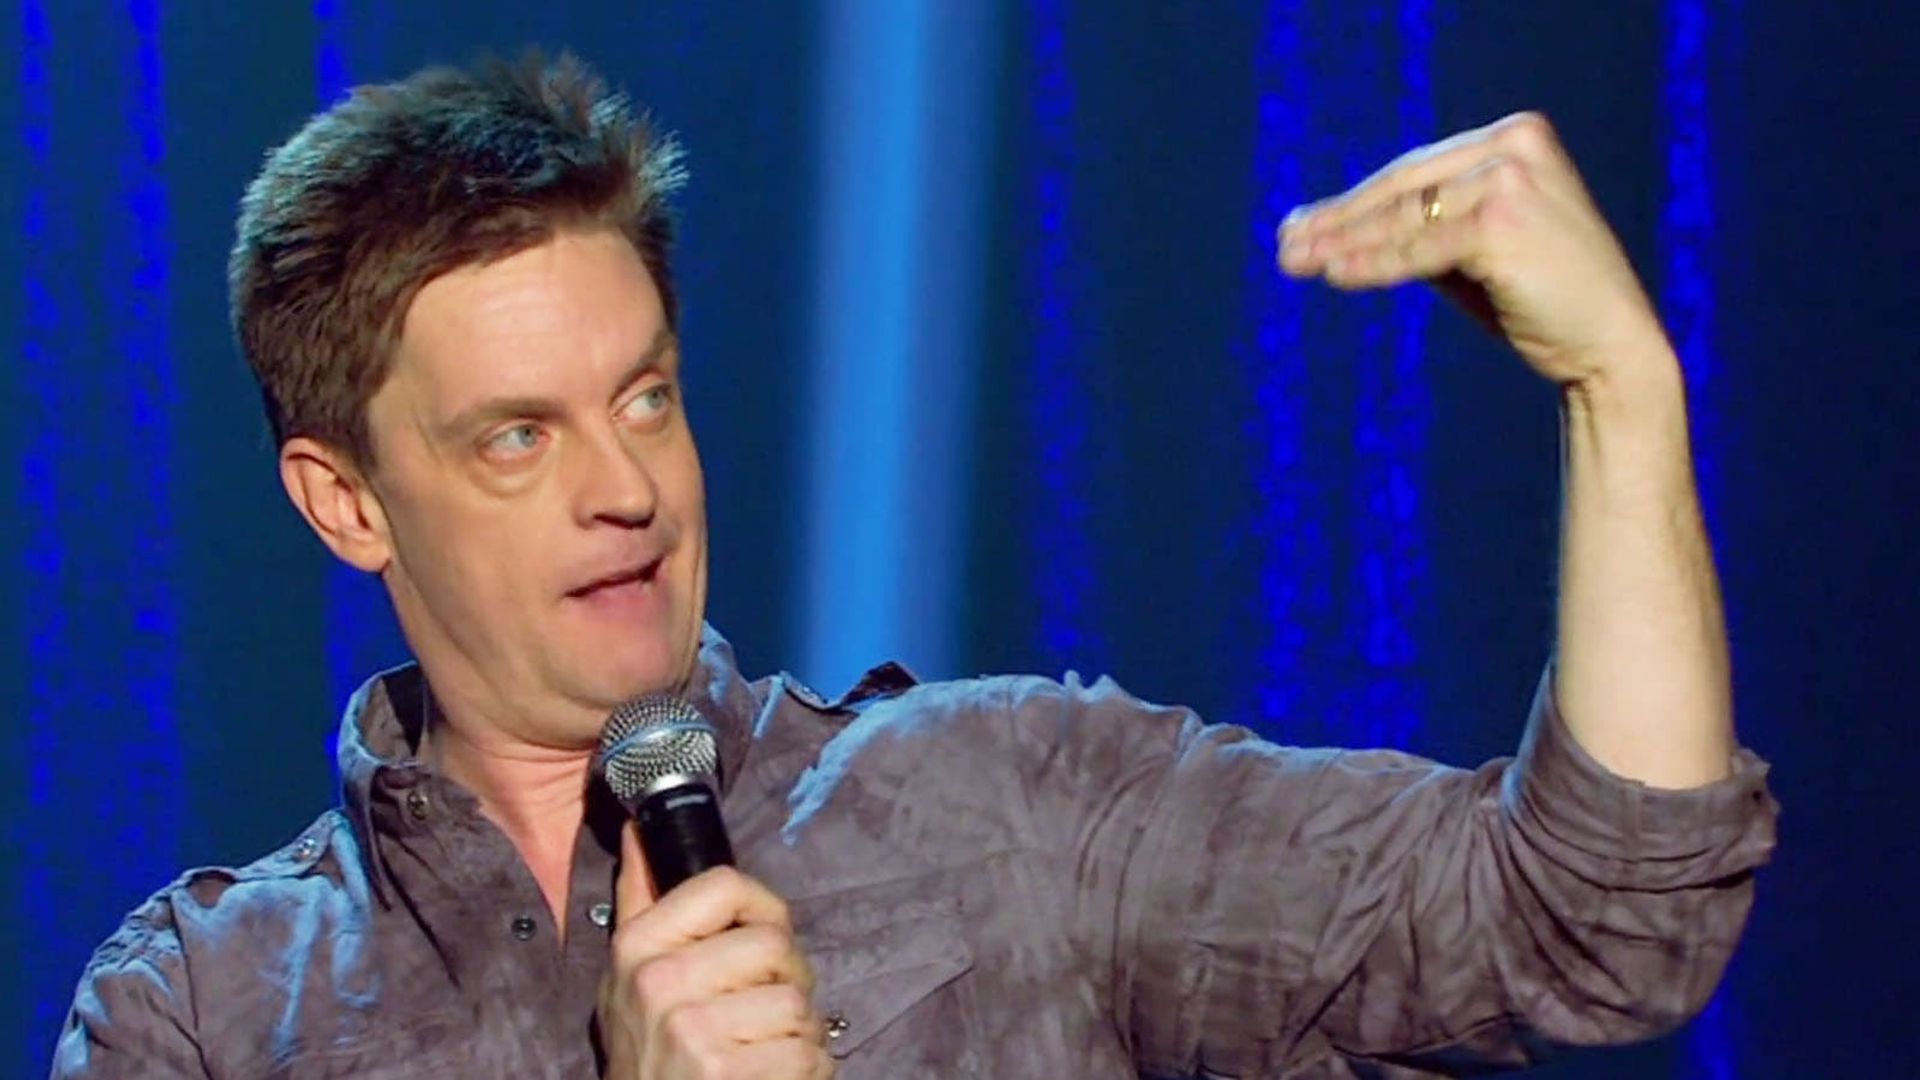 Jim Breuer: And Laughter for All background